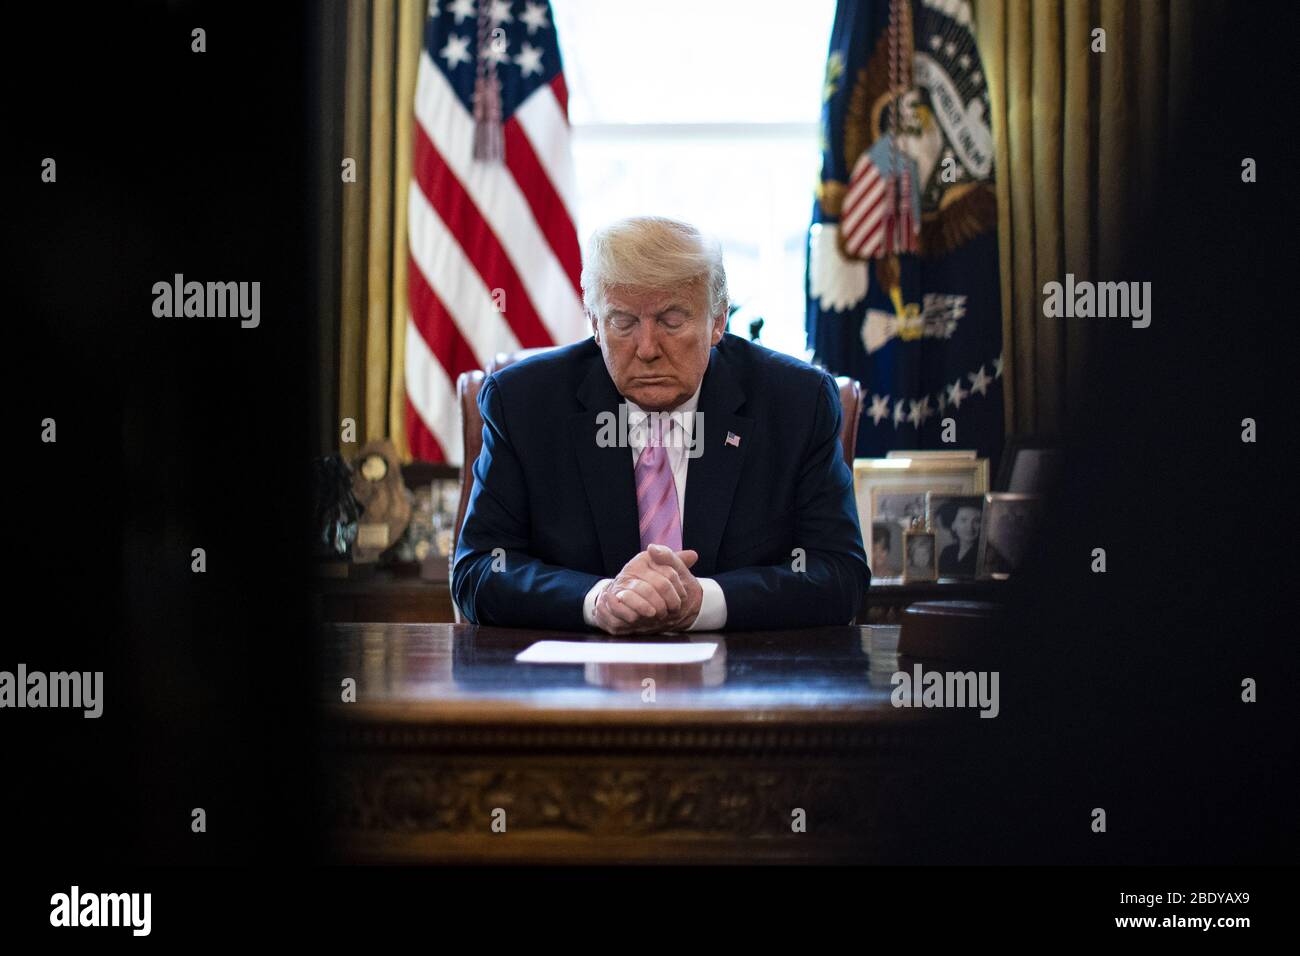 Washington, USA. 10th Apr 2020. President Donald Trump participants in an Easter blessing in the Oval Office of the White House on Friday, April 10, 2020 in Washington. Photo by Al Drago Credit: UPI/Alamy Live News Stock Photo